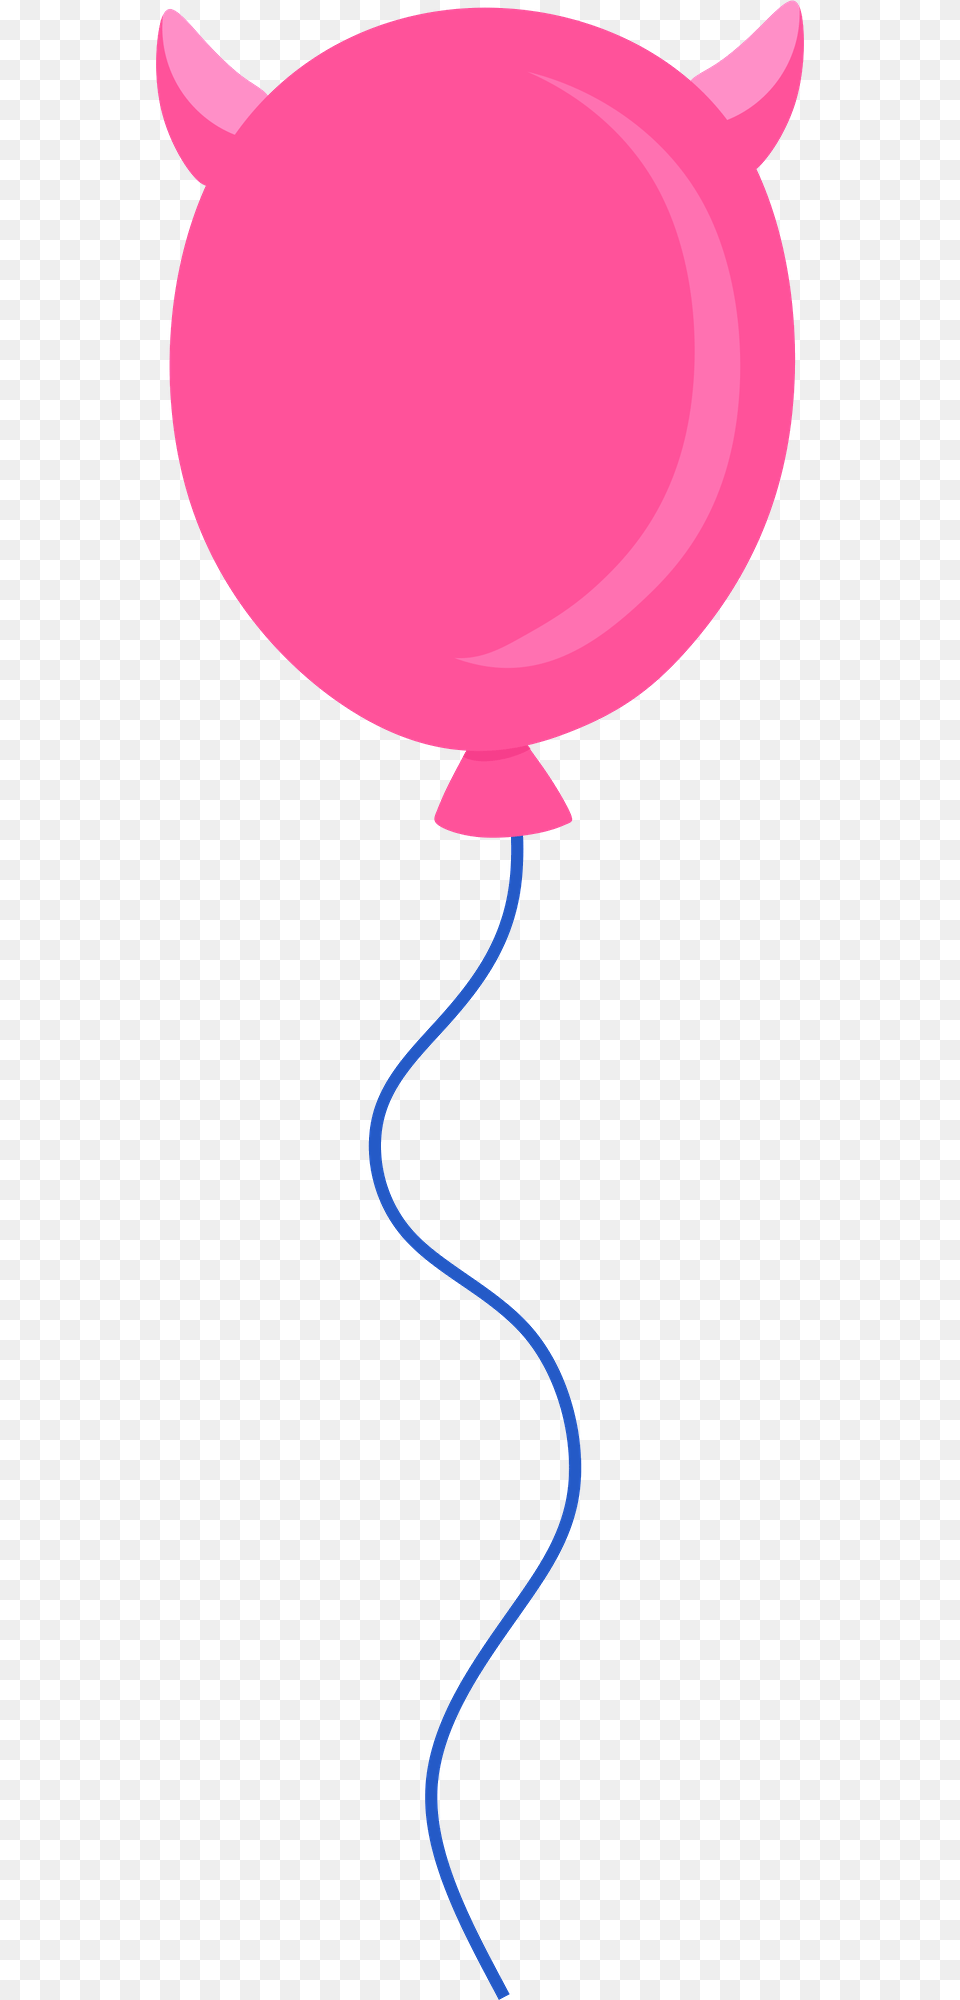 Minus Say Hello Clip One Pink Balloon Clipart Free Transparent Png